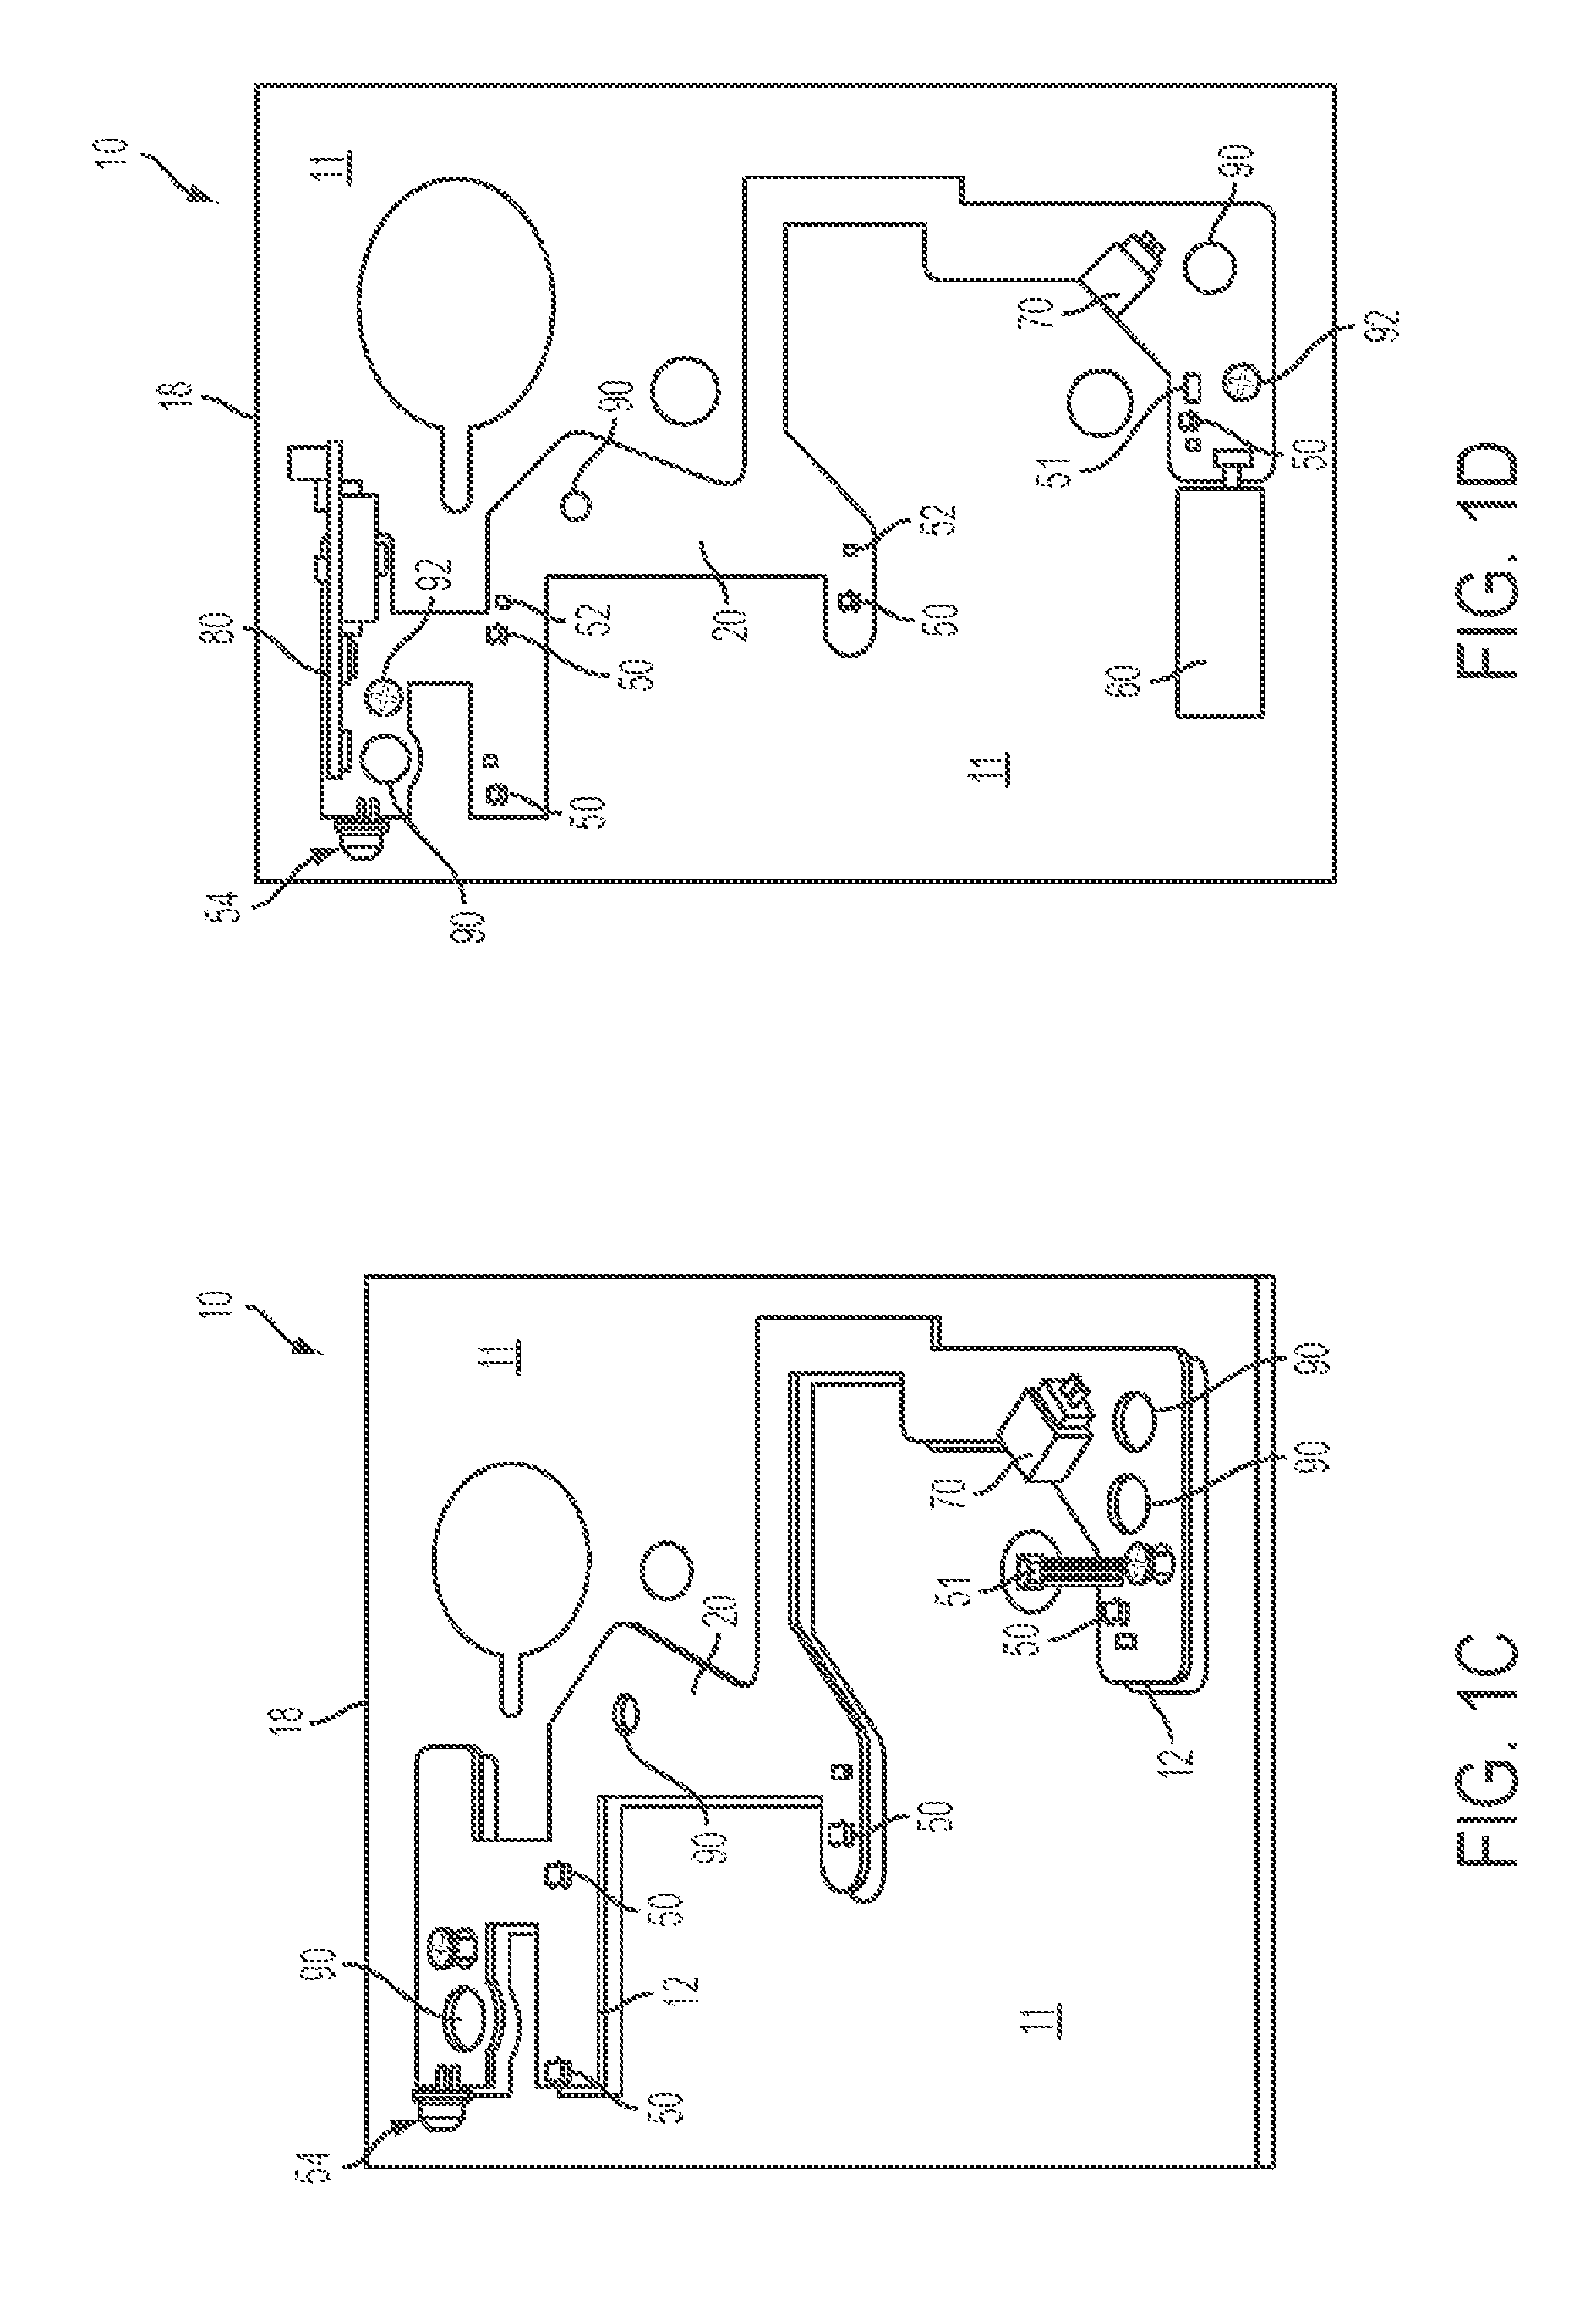 Locking device with embedded circuit board